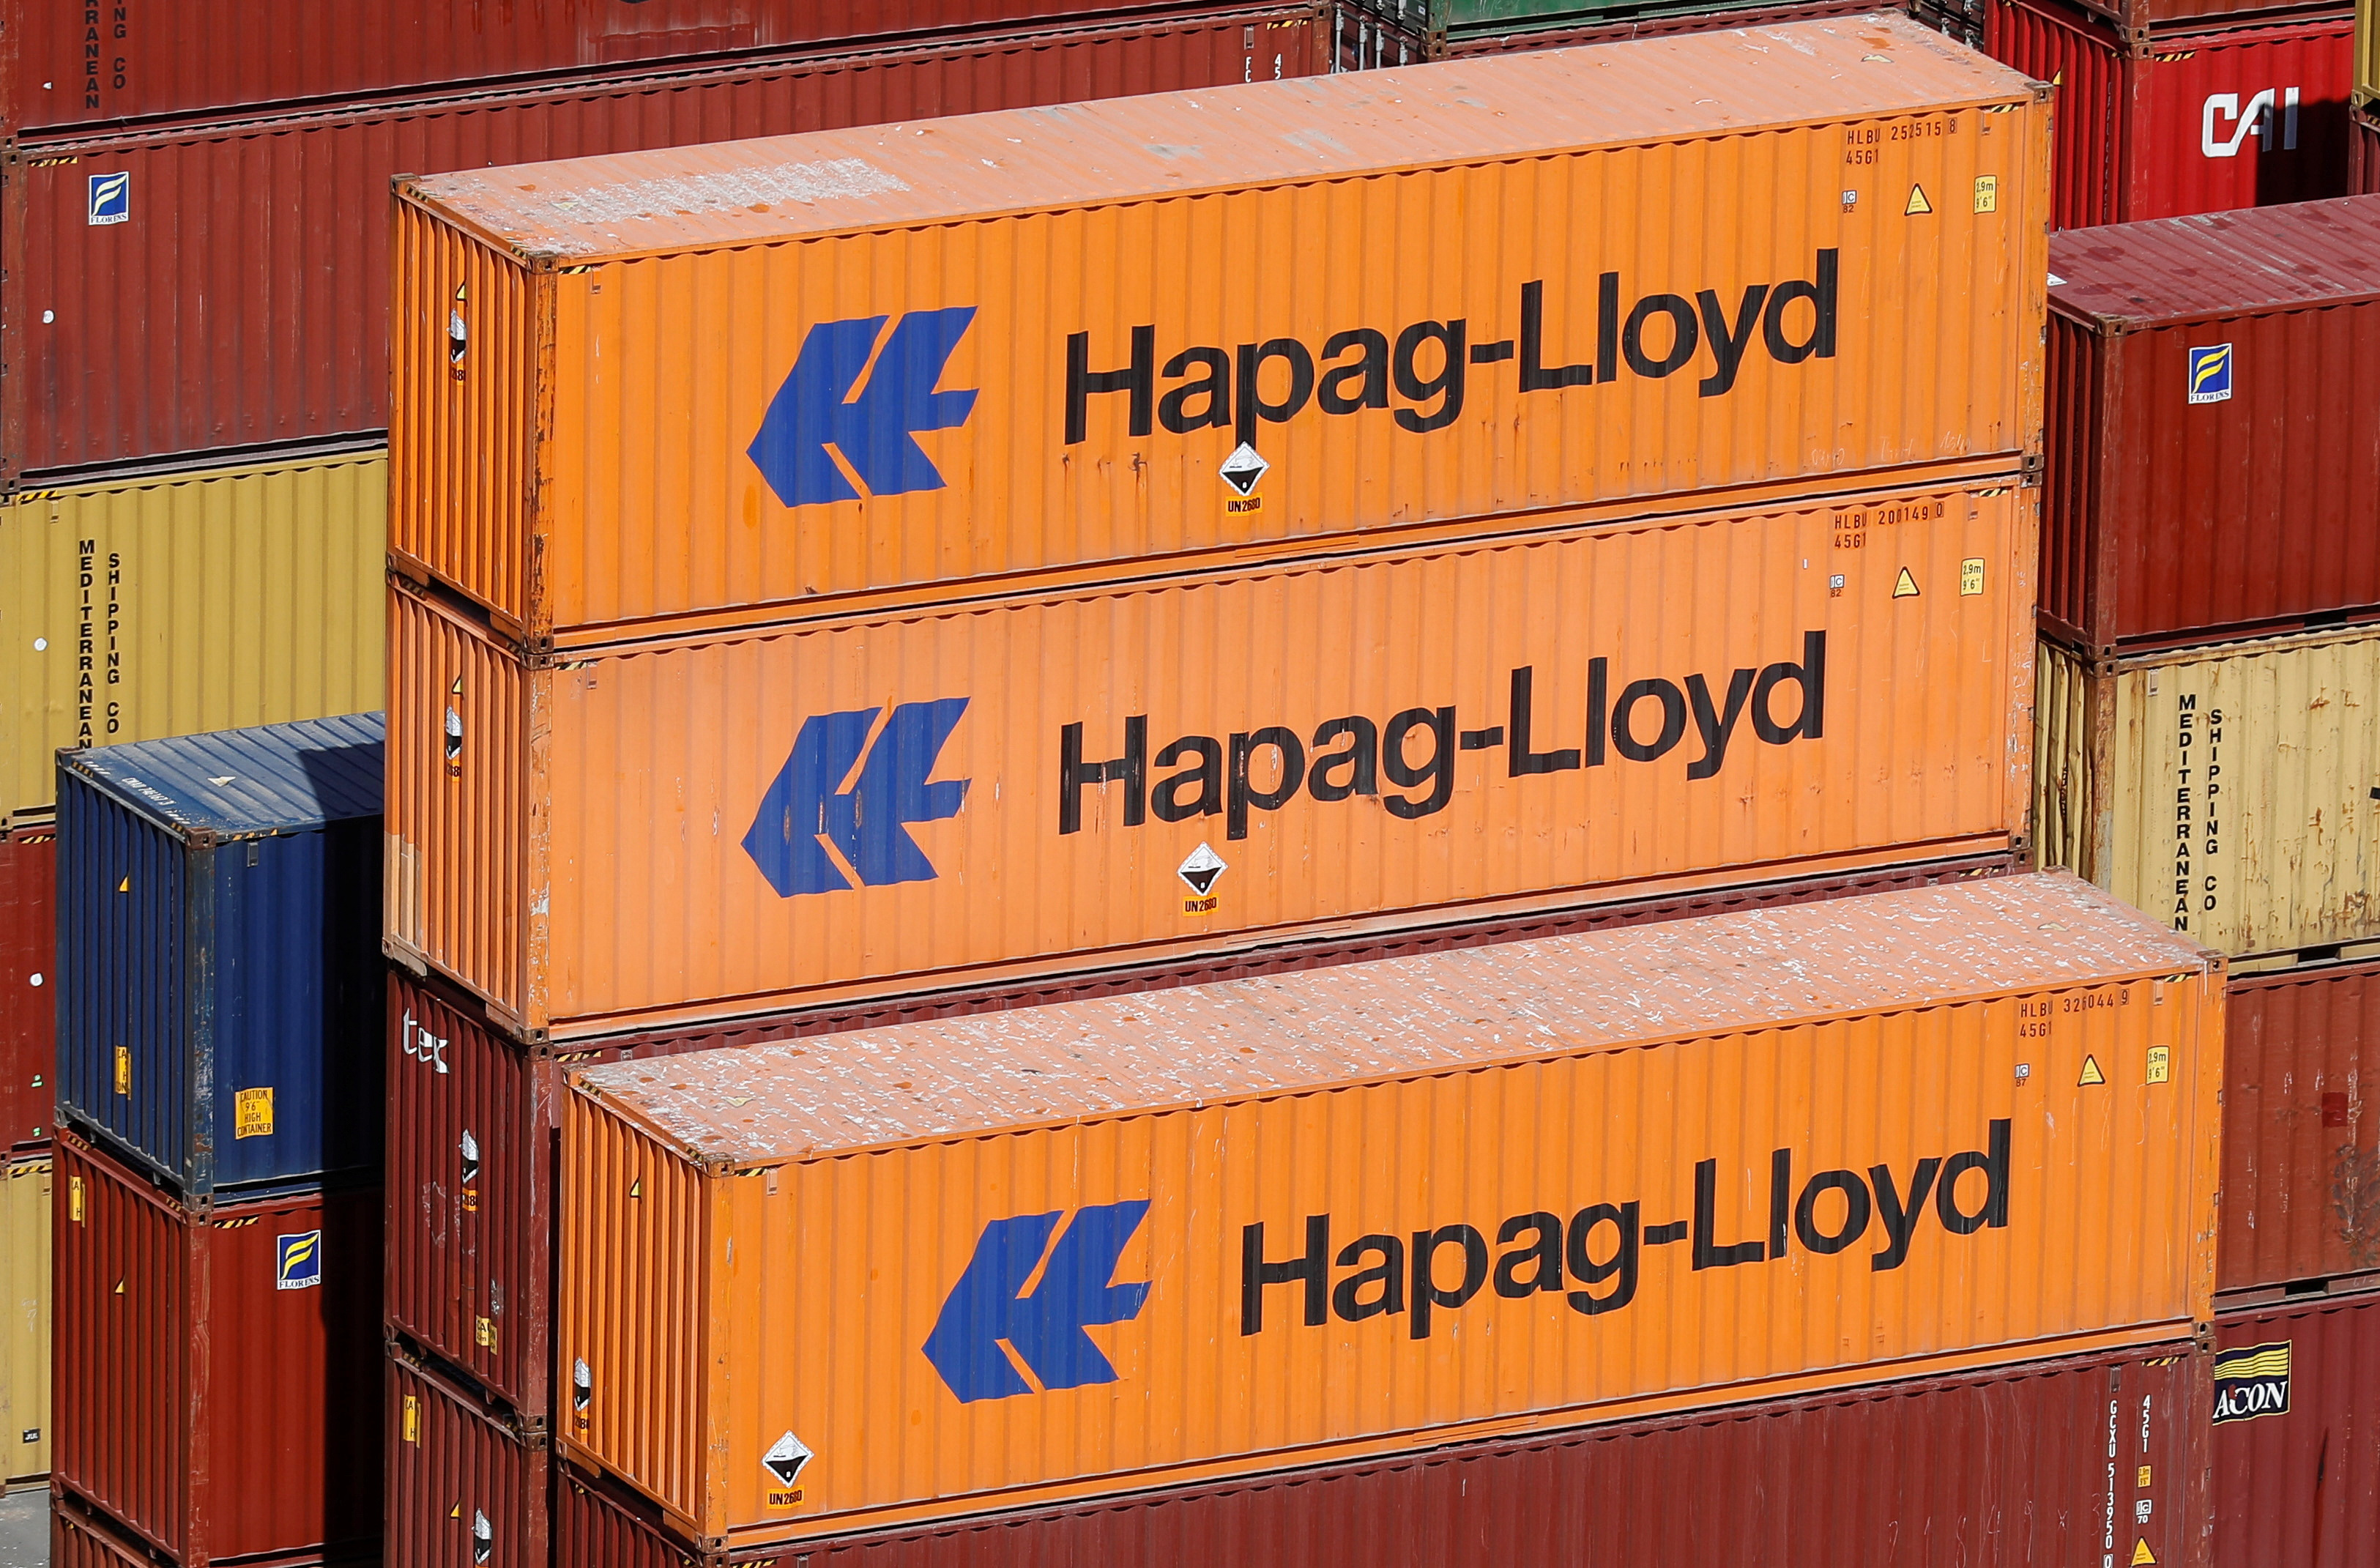 Containers of the Hapag-Lloyd shipping company are pictured at the Valparaiso port